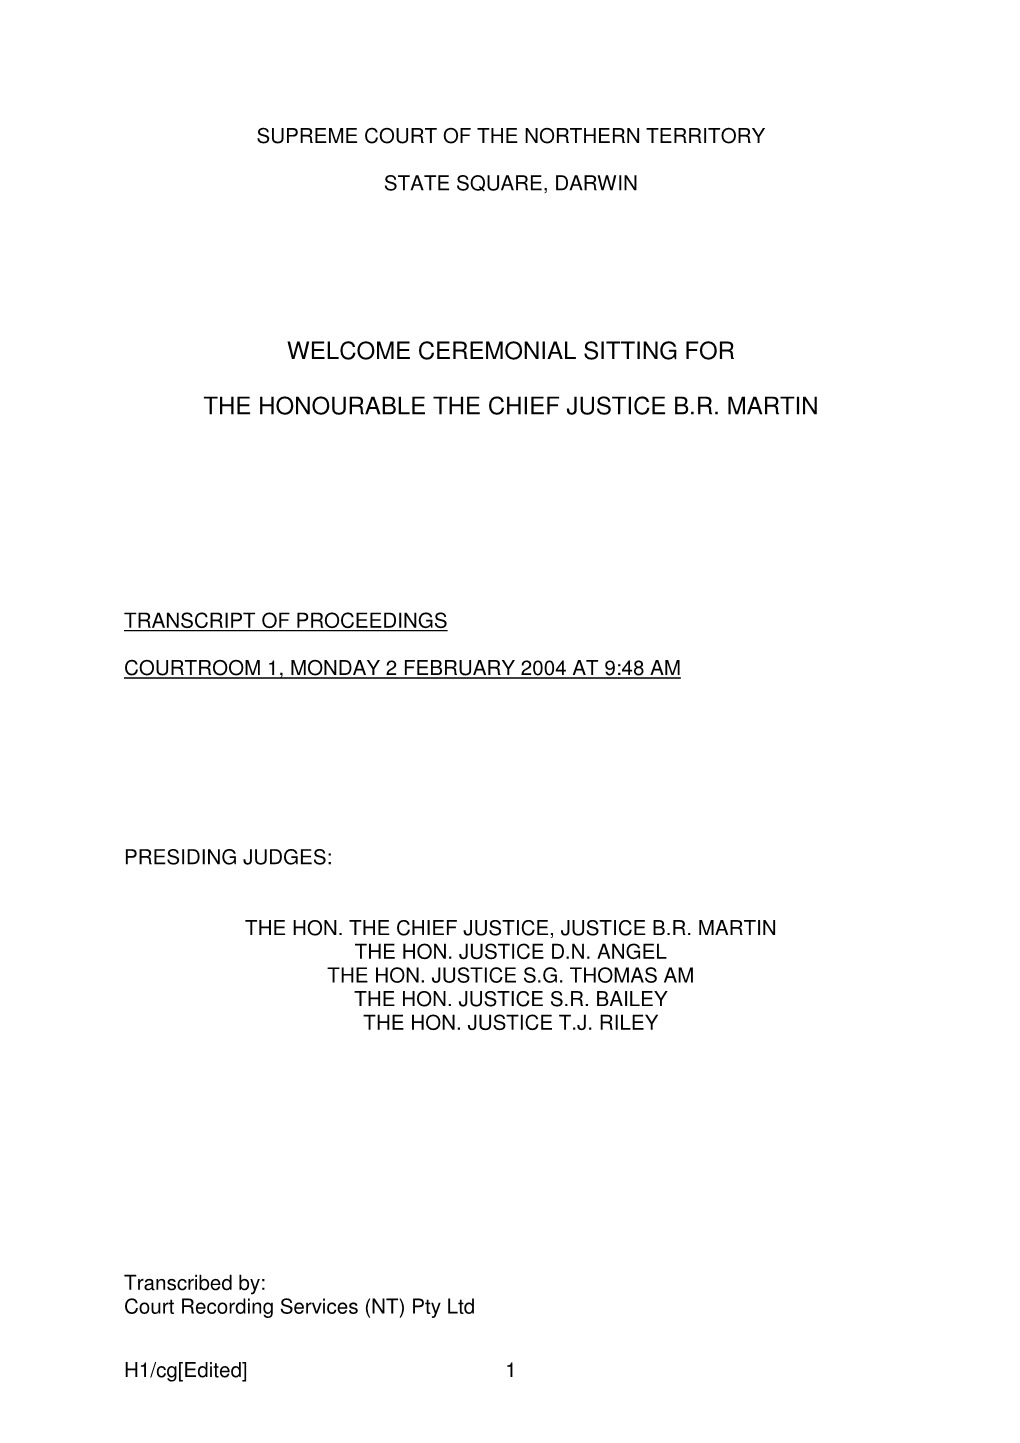 Remarks at the Swearing-In of Chief Justice Brian Ross Martin